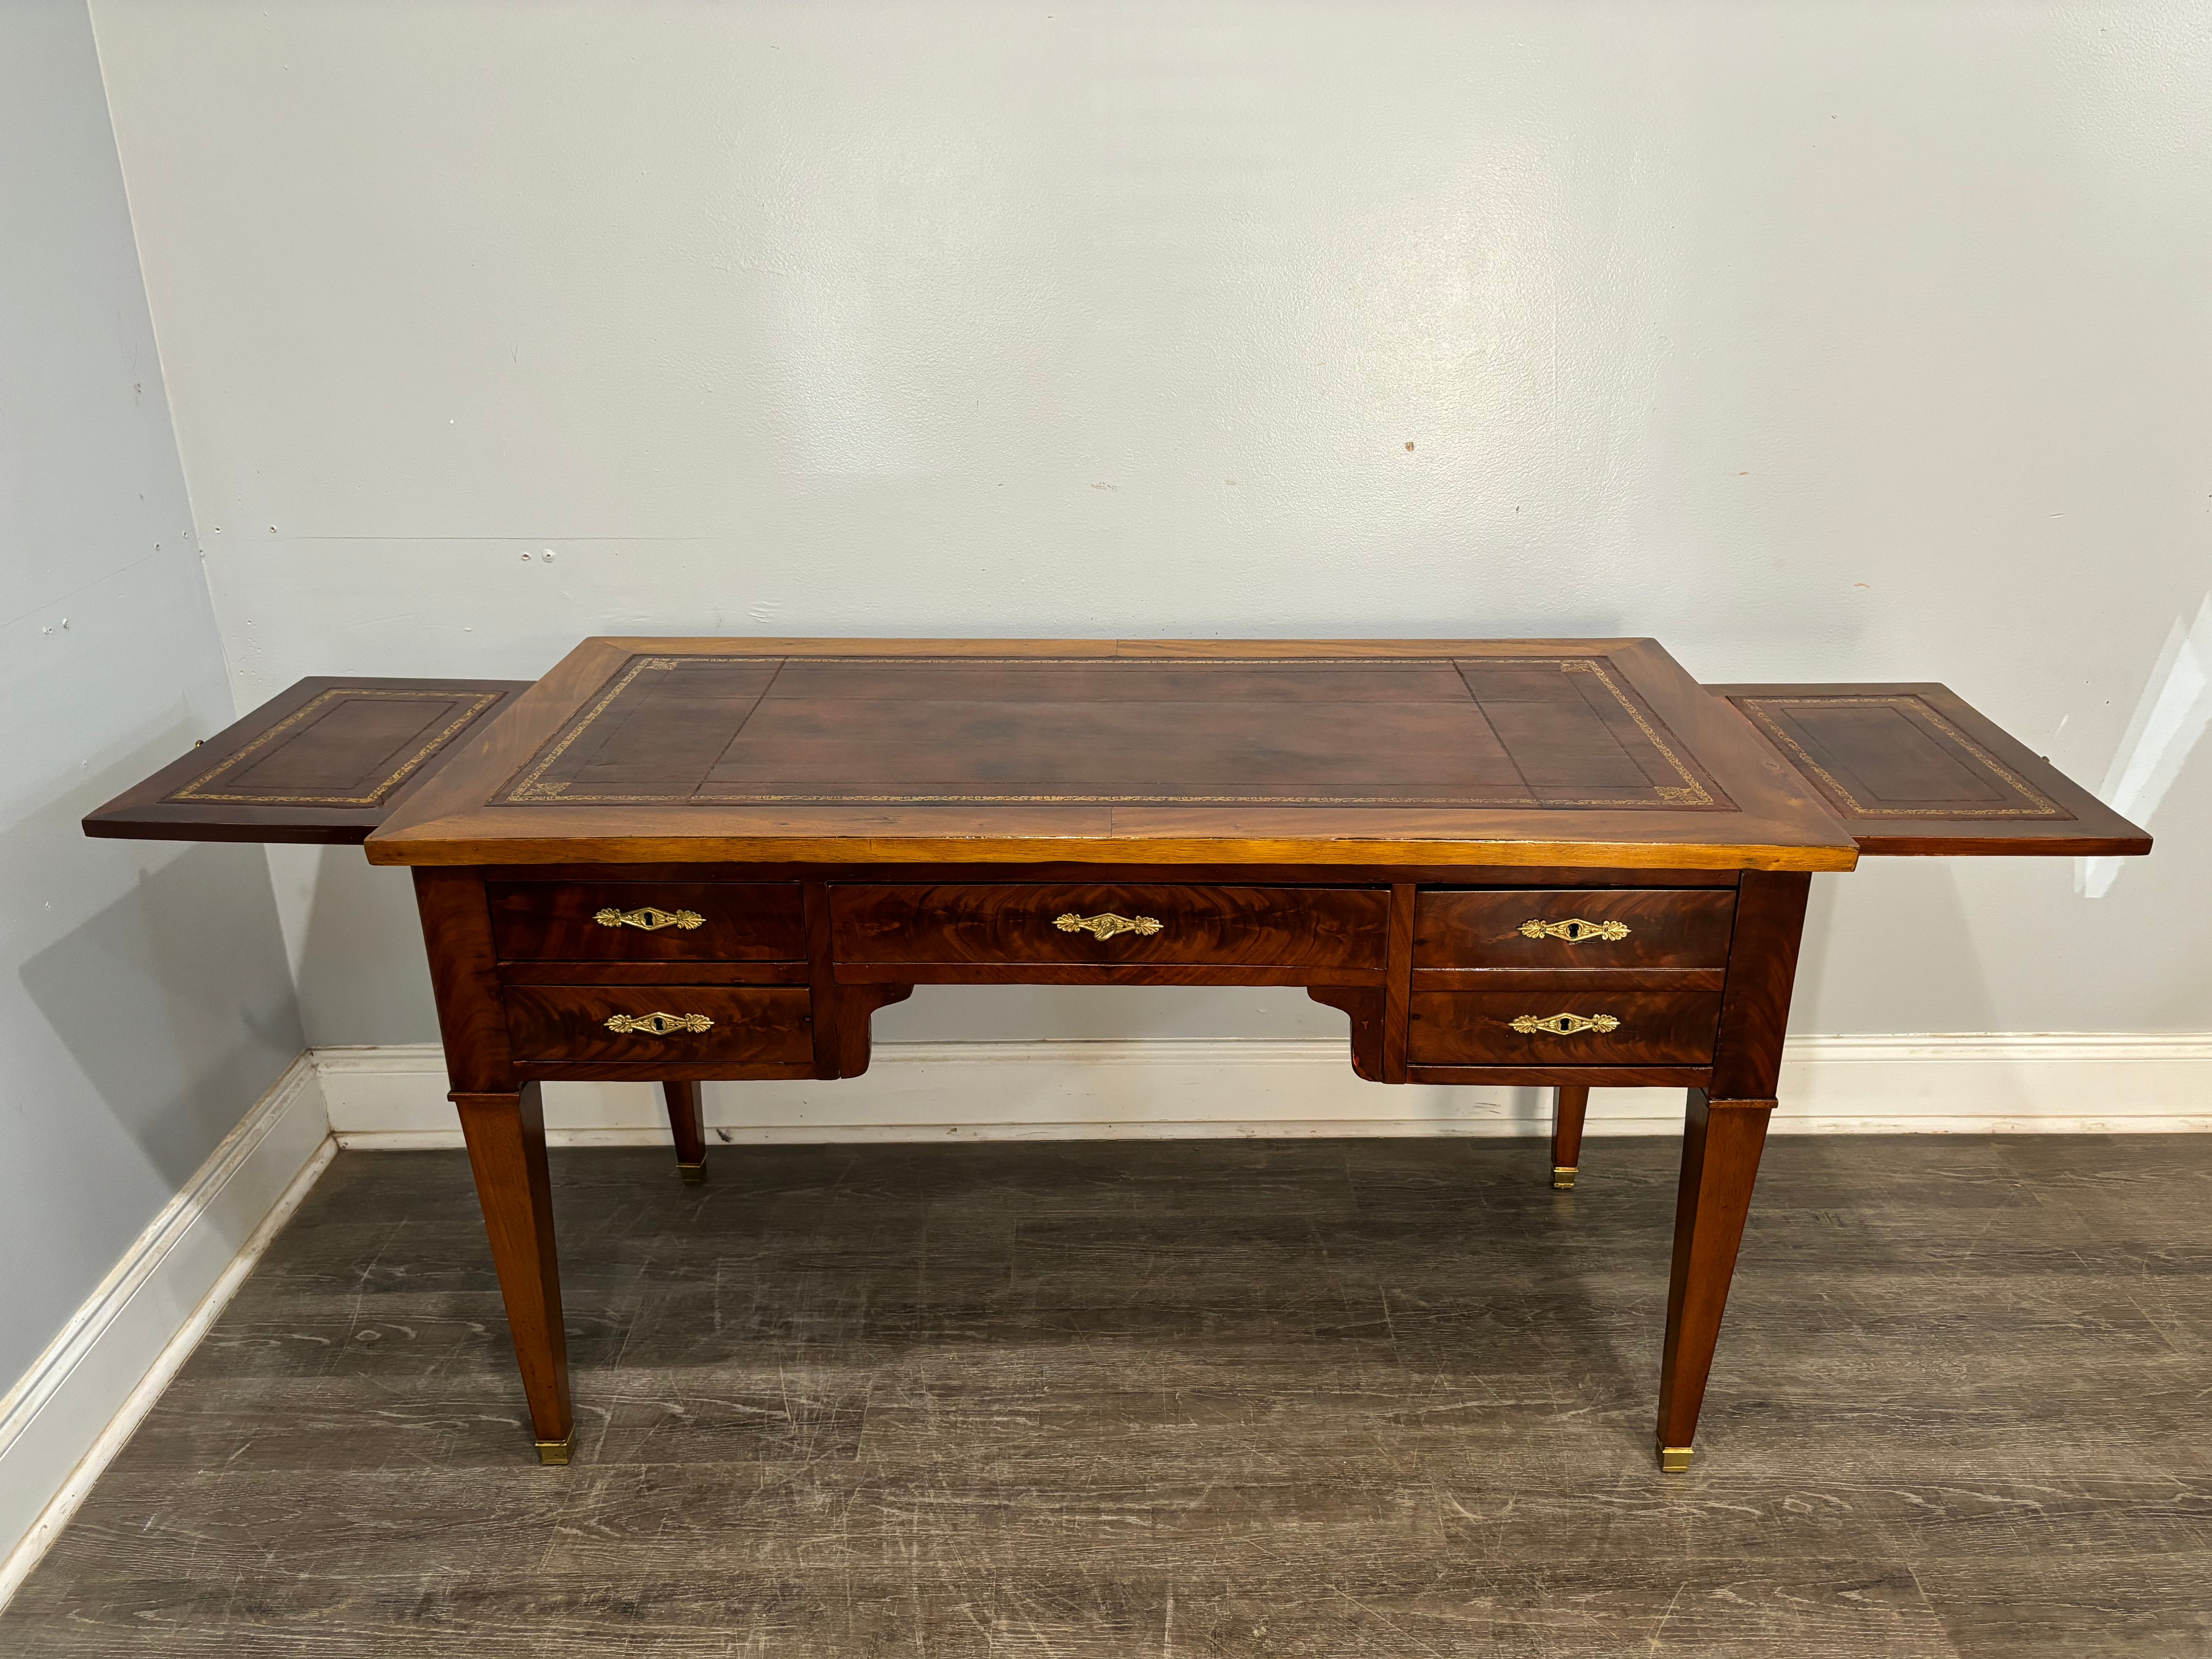 This Louis XVI style Desk is made of mahogany and a wonderful brown  leather top which is in good condition. It has 2 extensions on each side. The length of the desk is 51.1''W and each extension is 12''W.
